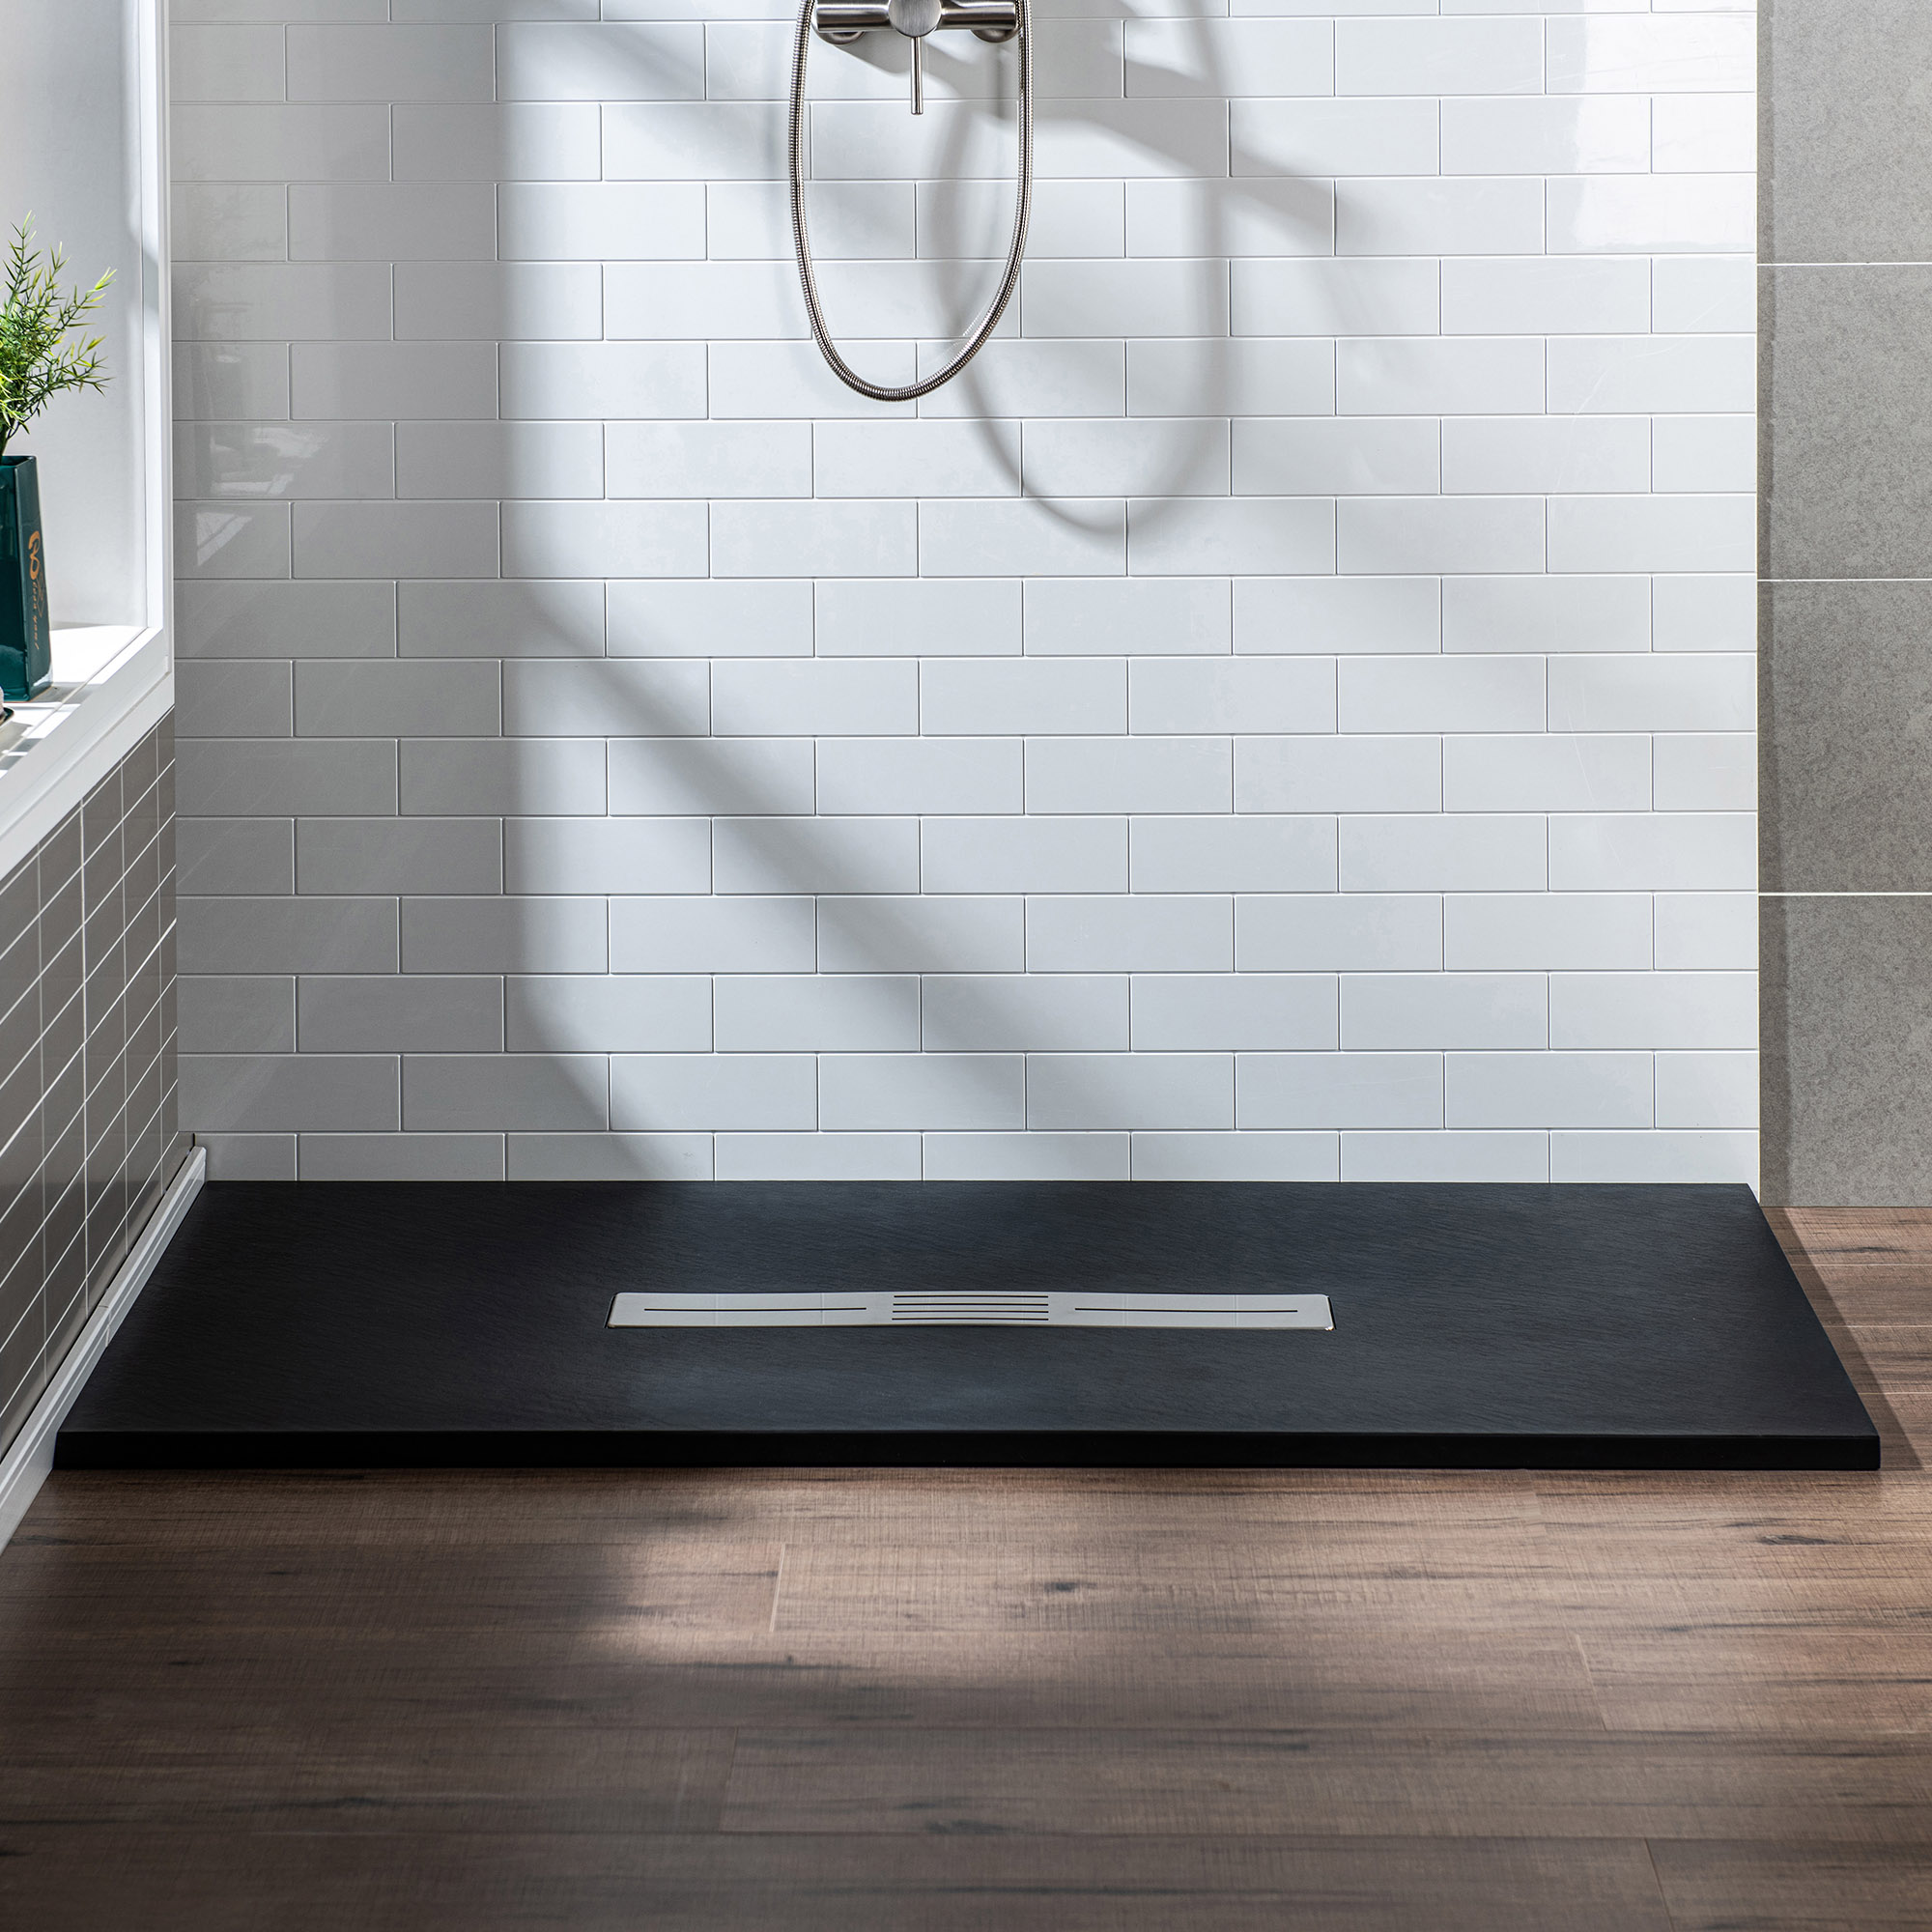  WOODBRIDGE 48-in L x 32-in W Zero Threshold End Drain Shower Base with Center Drain Placement, Matching Decorative Drain Plate and Tile Flange, Wheel Chair Access, Low Profile, Black_12481